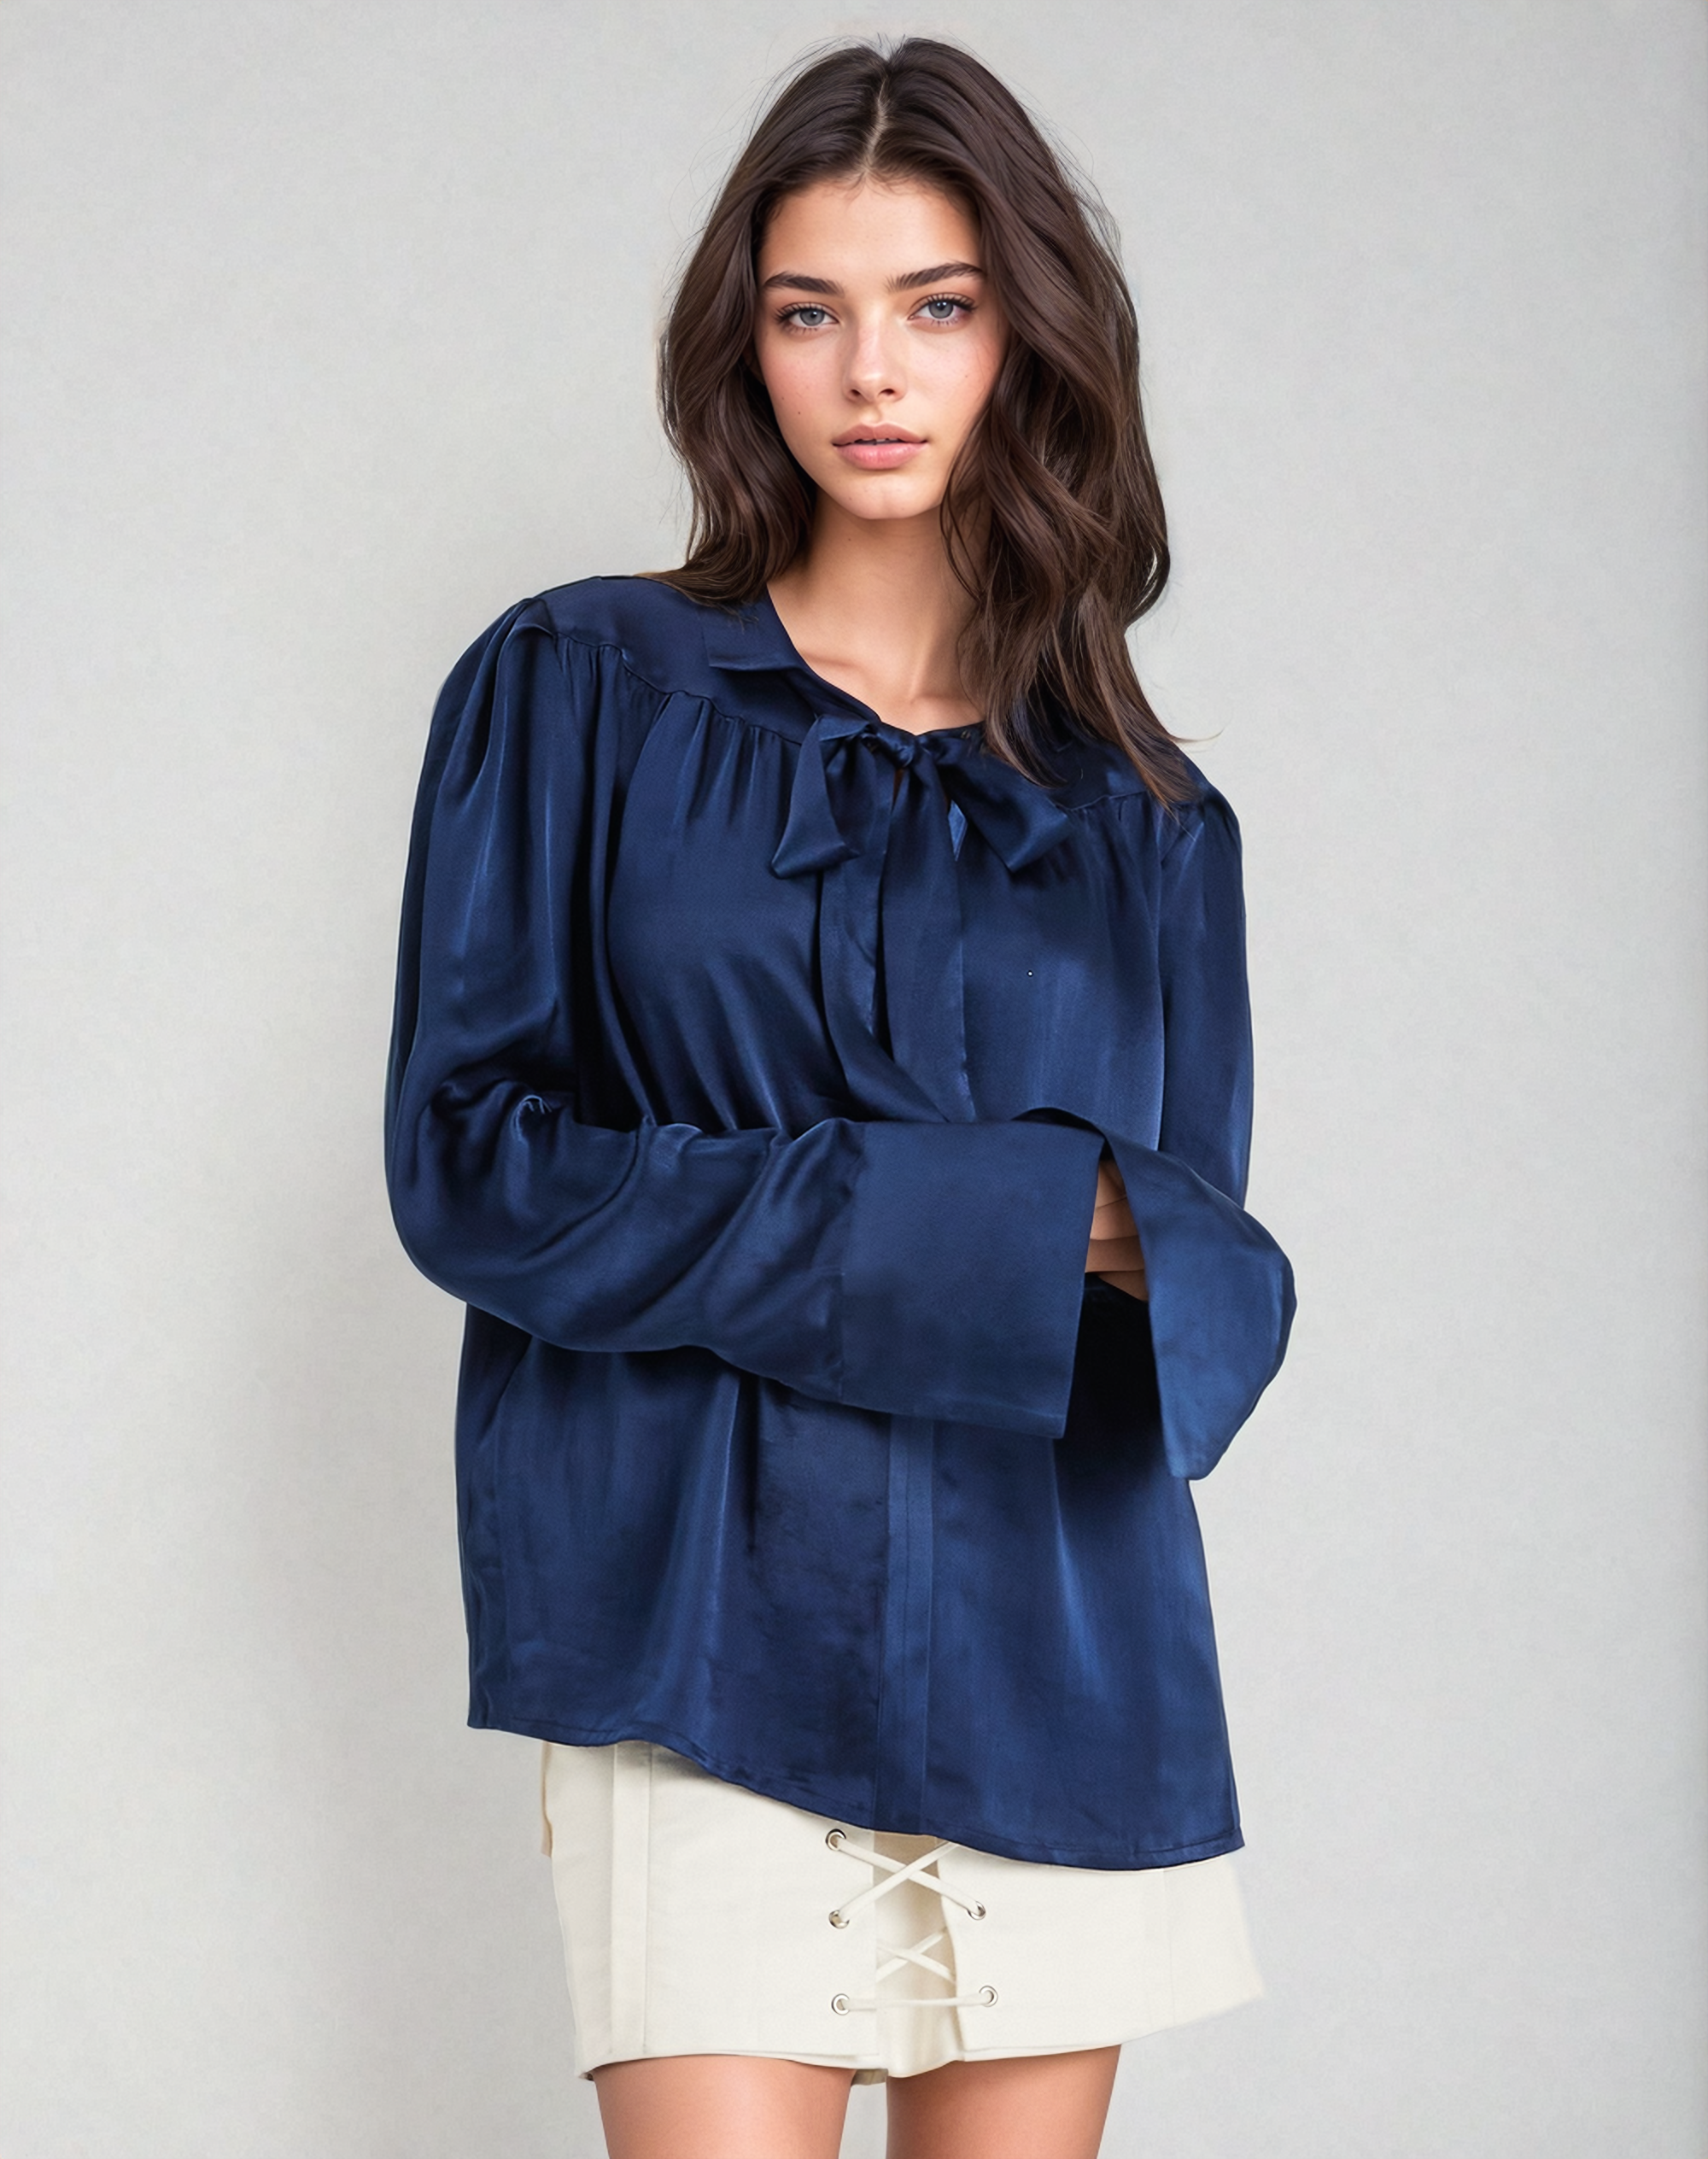 Tailored Silk Blouse with Gathers, V-Neckline, and Elegant Collar Tie